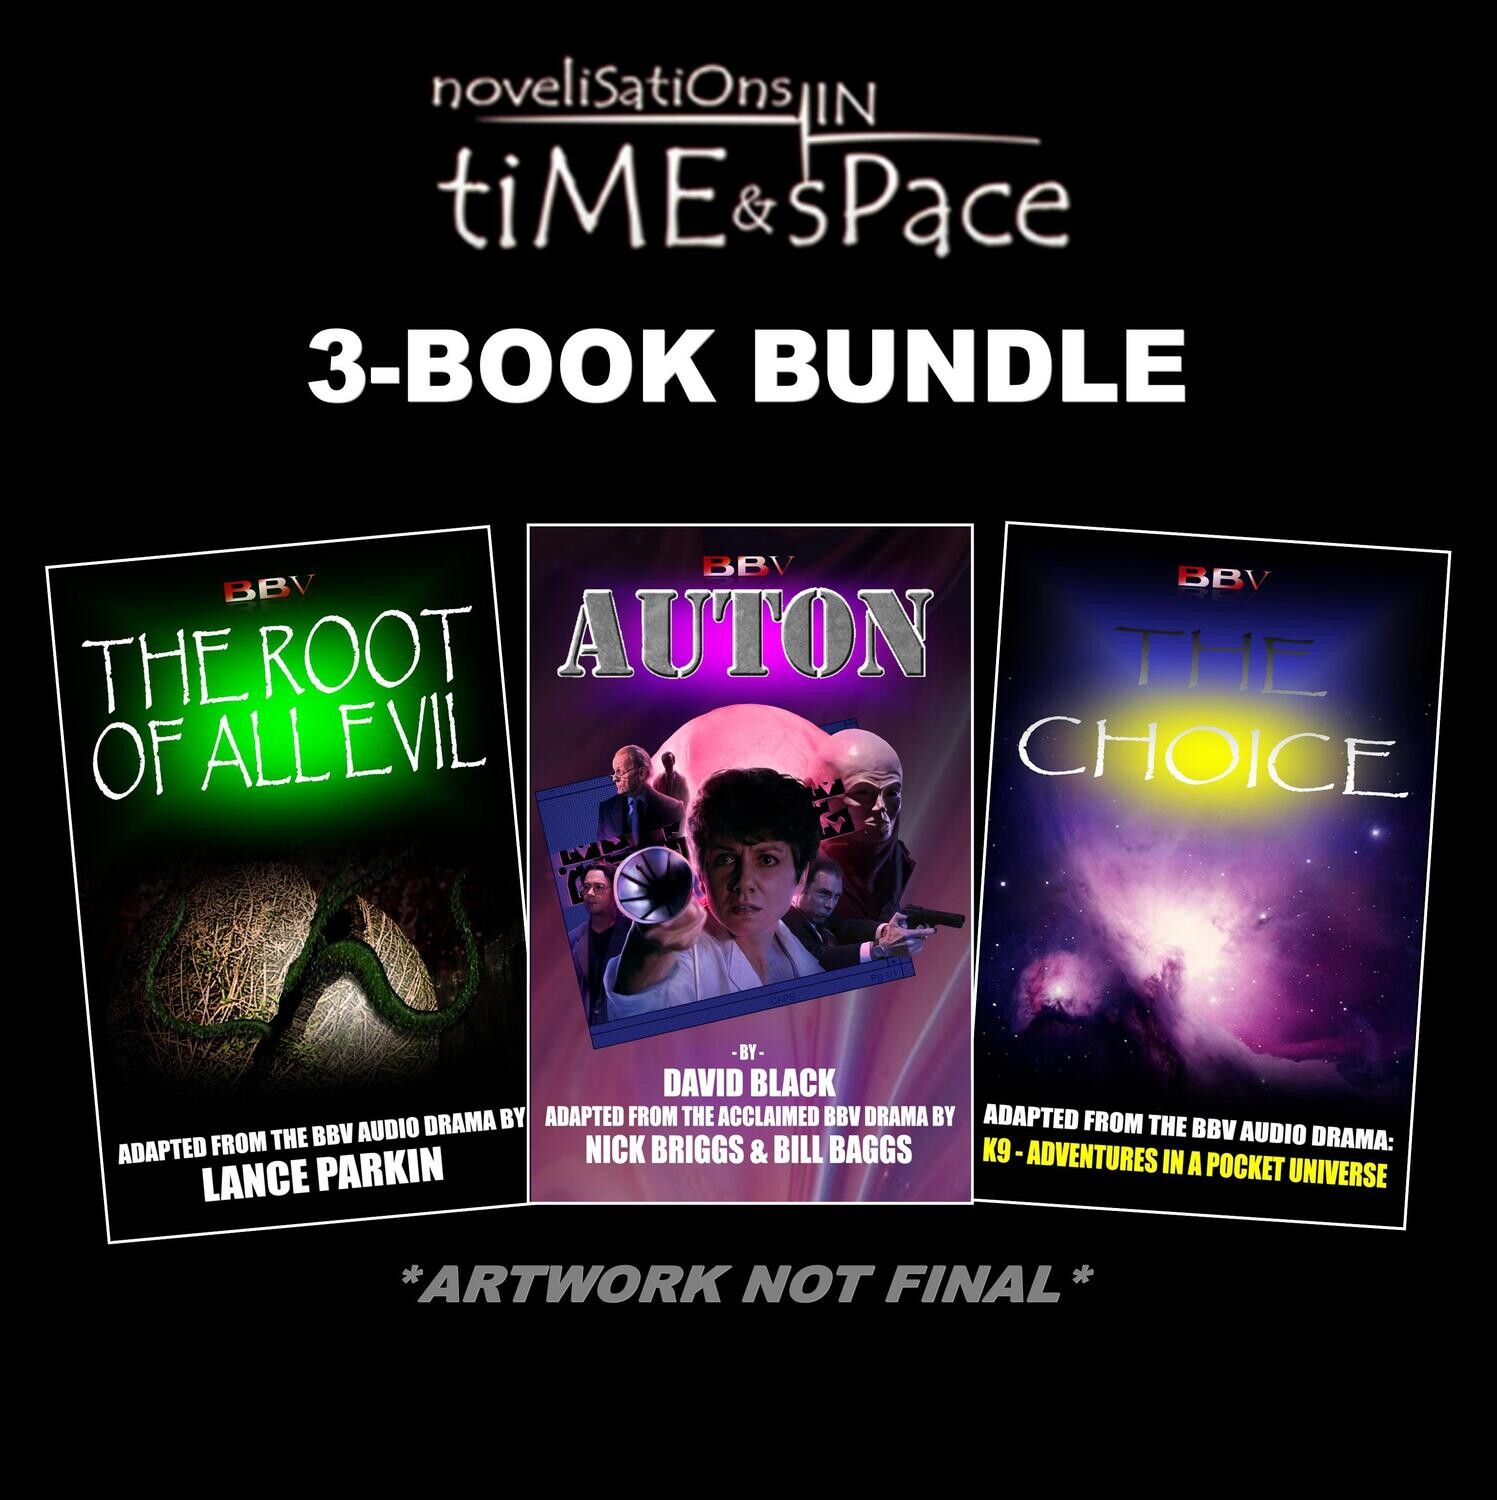 3 Novel Bundle (UK ONLY PRE-ORDER For discount)The Root of All Evil, Auton, The Choice (POCKET BOOK Pre-order)